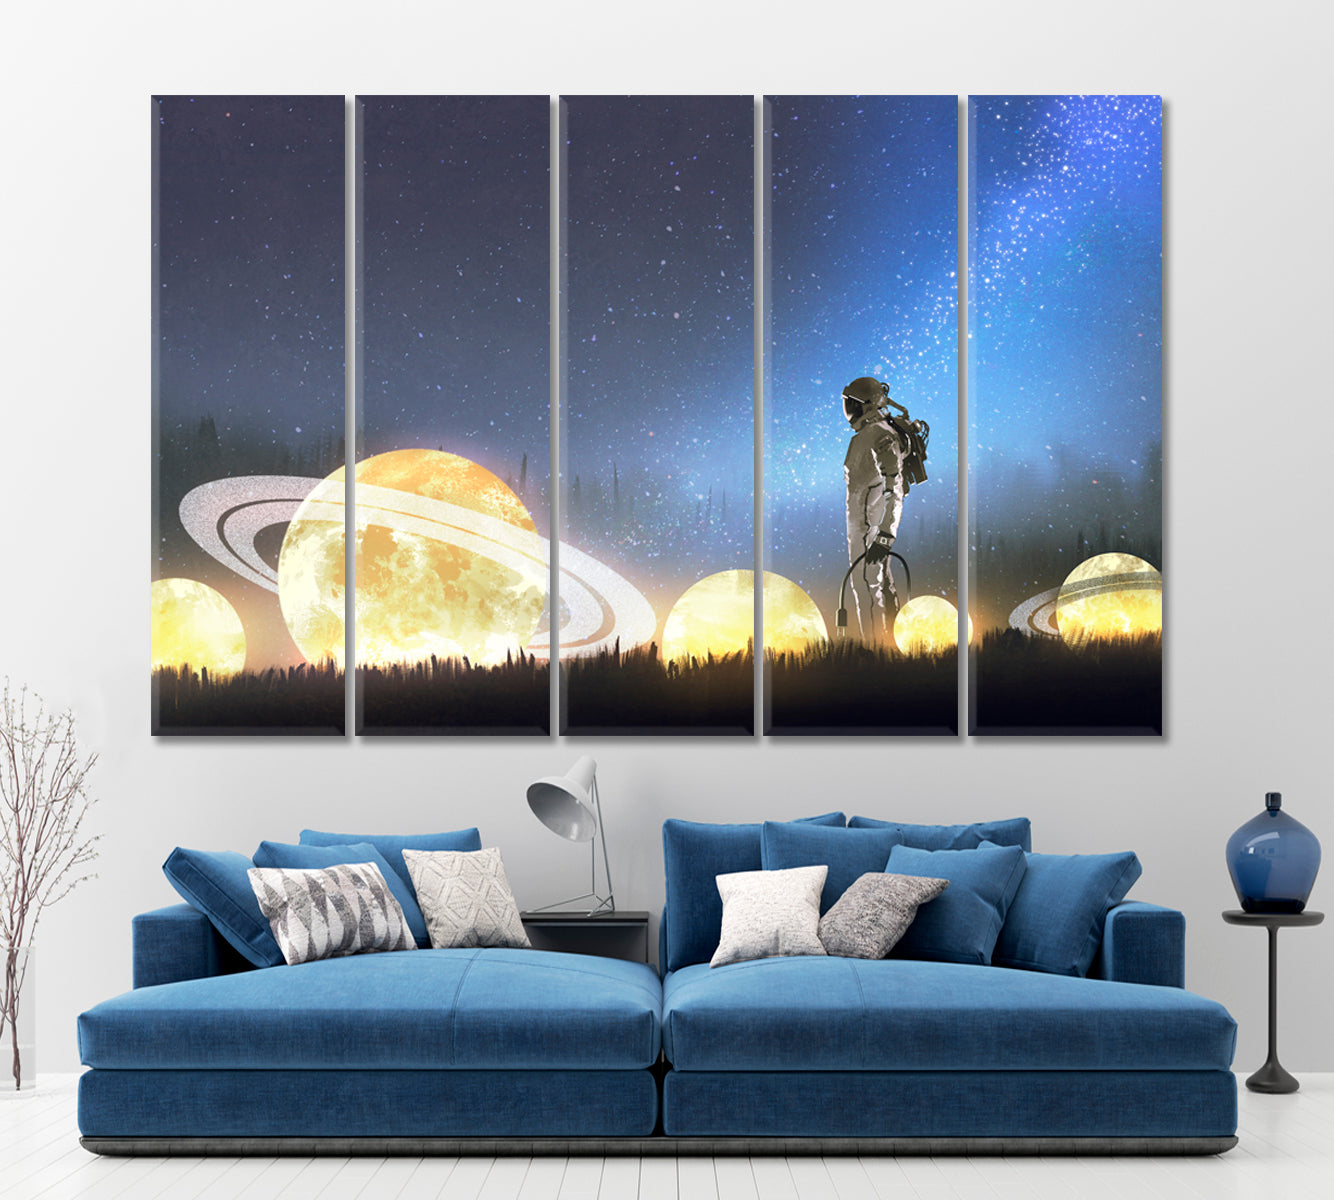 Astronaut And Beautiful Surreal Night Cosmic Scenery Surreal Fantasy Large Art Print Décor Artesty 5 panels 36" x 24" 